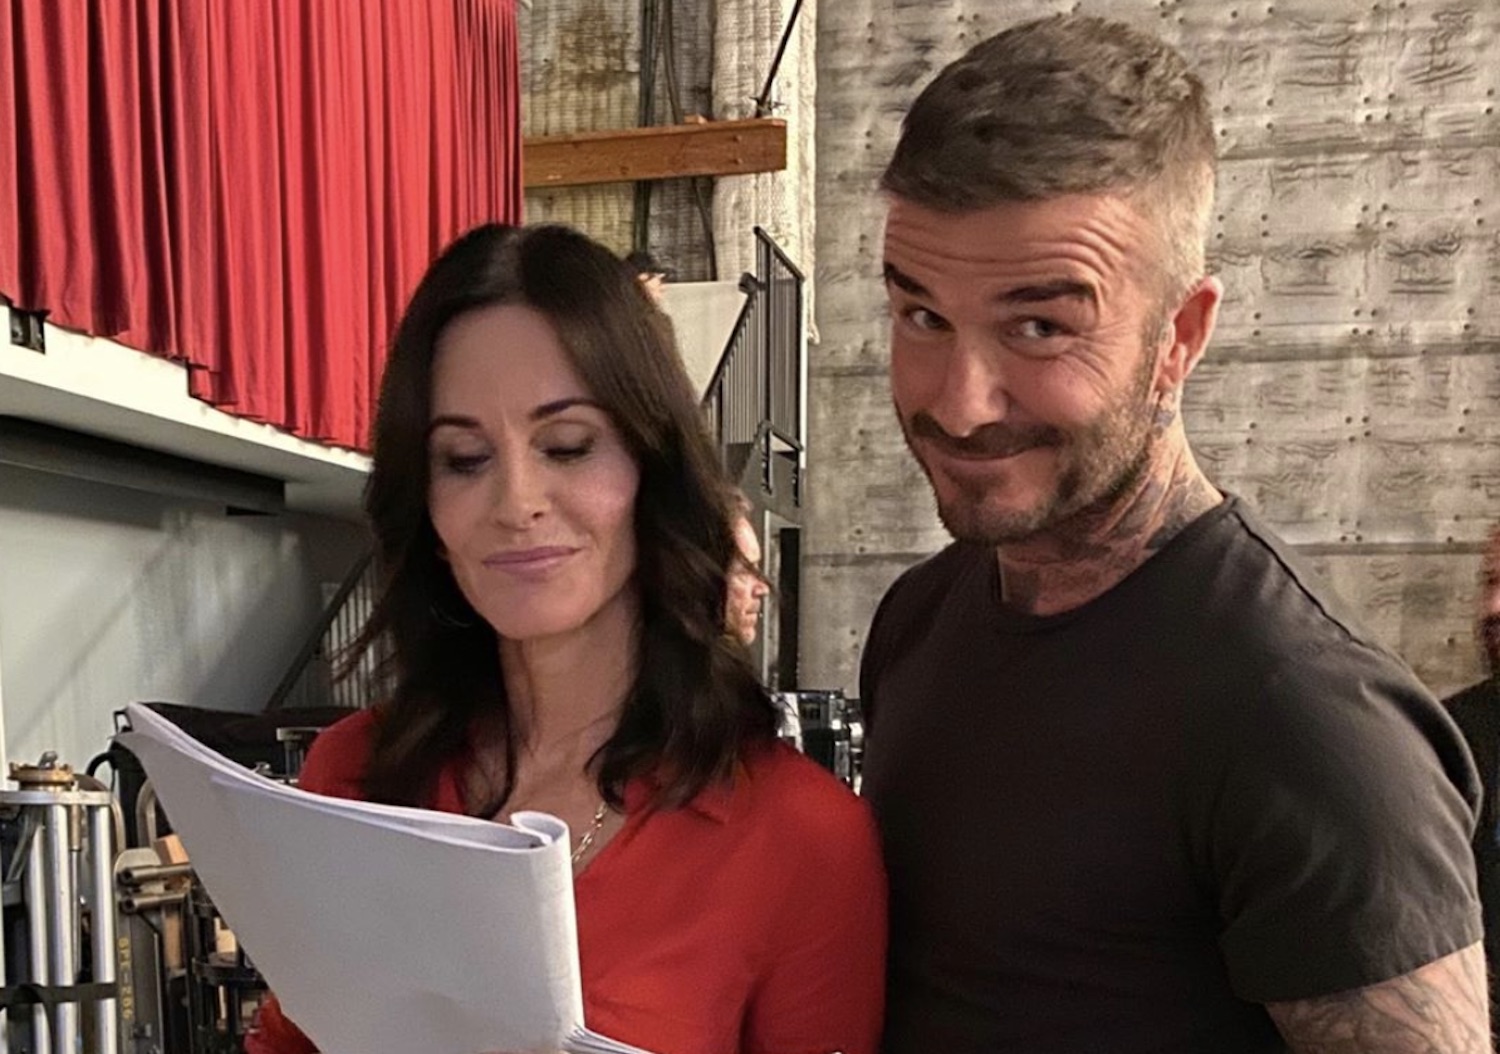 Courteney Cox Casually Posted A Photo With David Beckham… In A Hot Tub